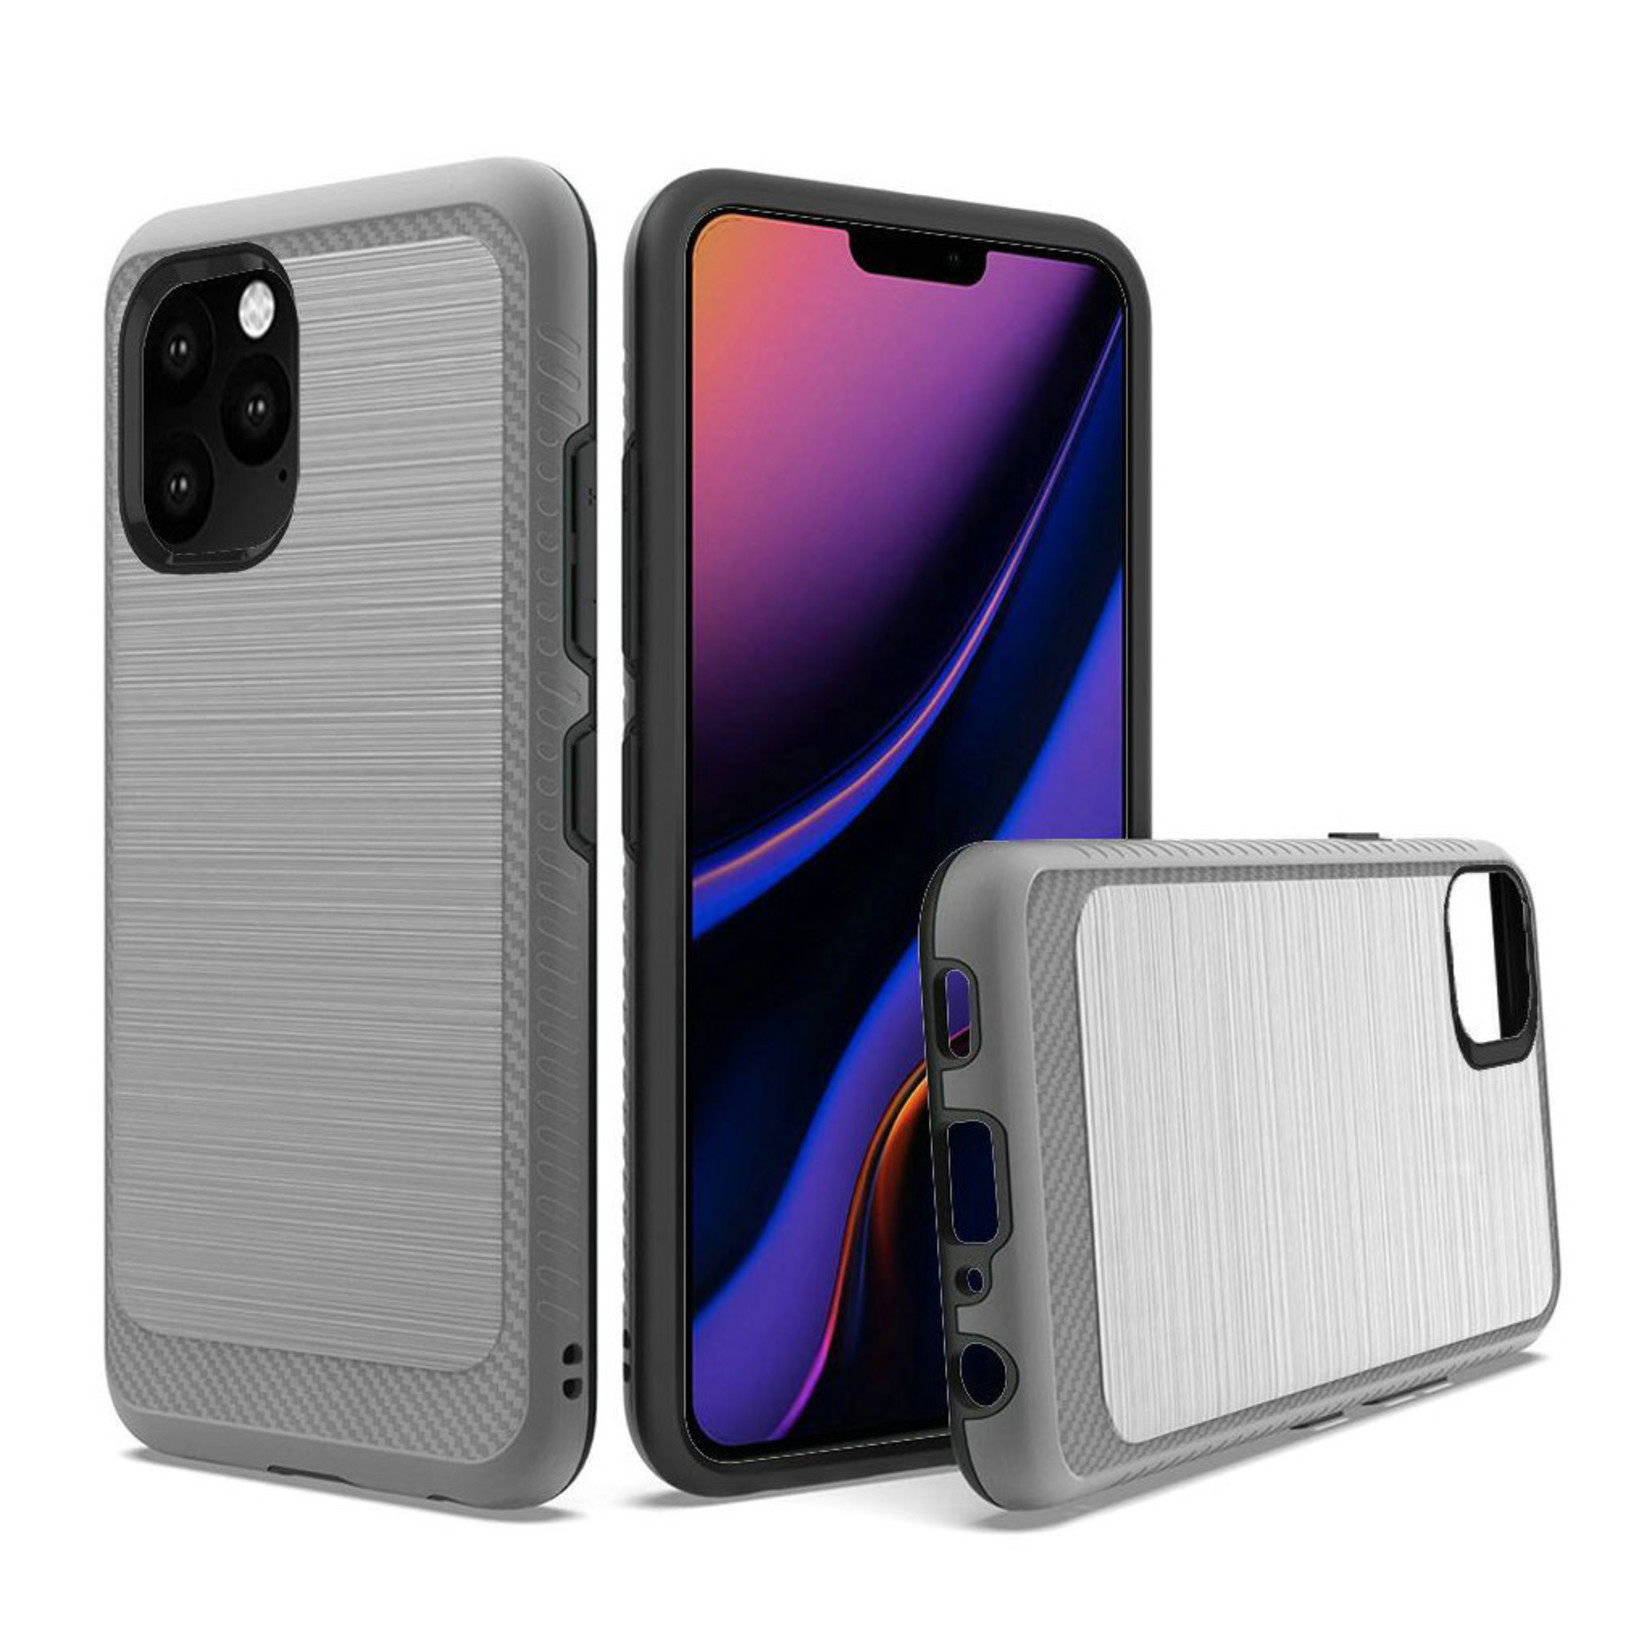 Metallic PC TPU Brushed Case with Carbon Fiber Edge for iPhone 11 Pro